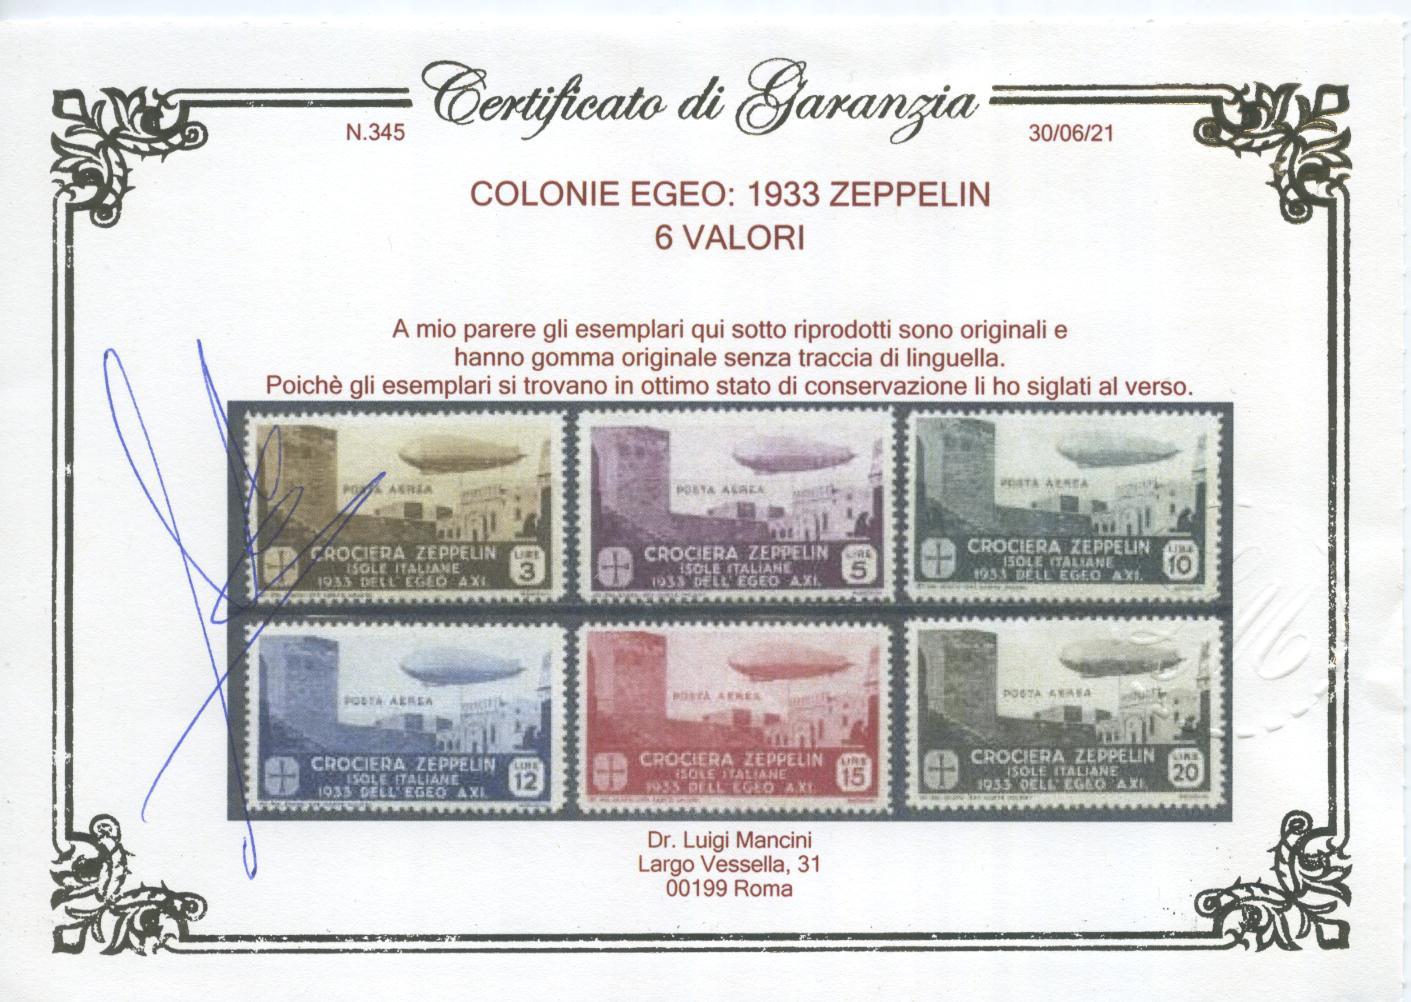 Scansione lotto: COLONIE EGEO 1933 ZEPPELIN 6V. 4 **  CERT.